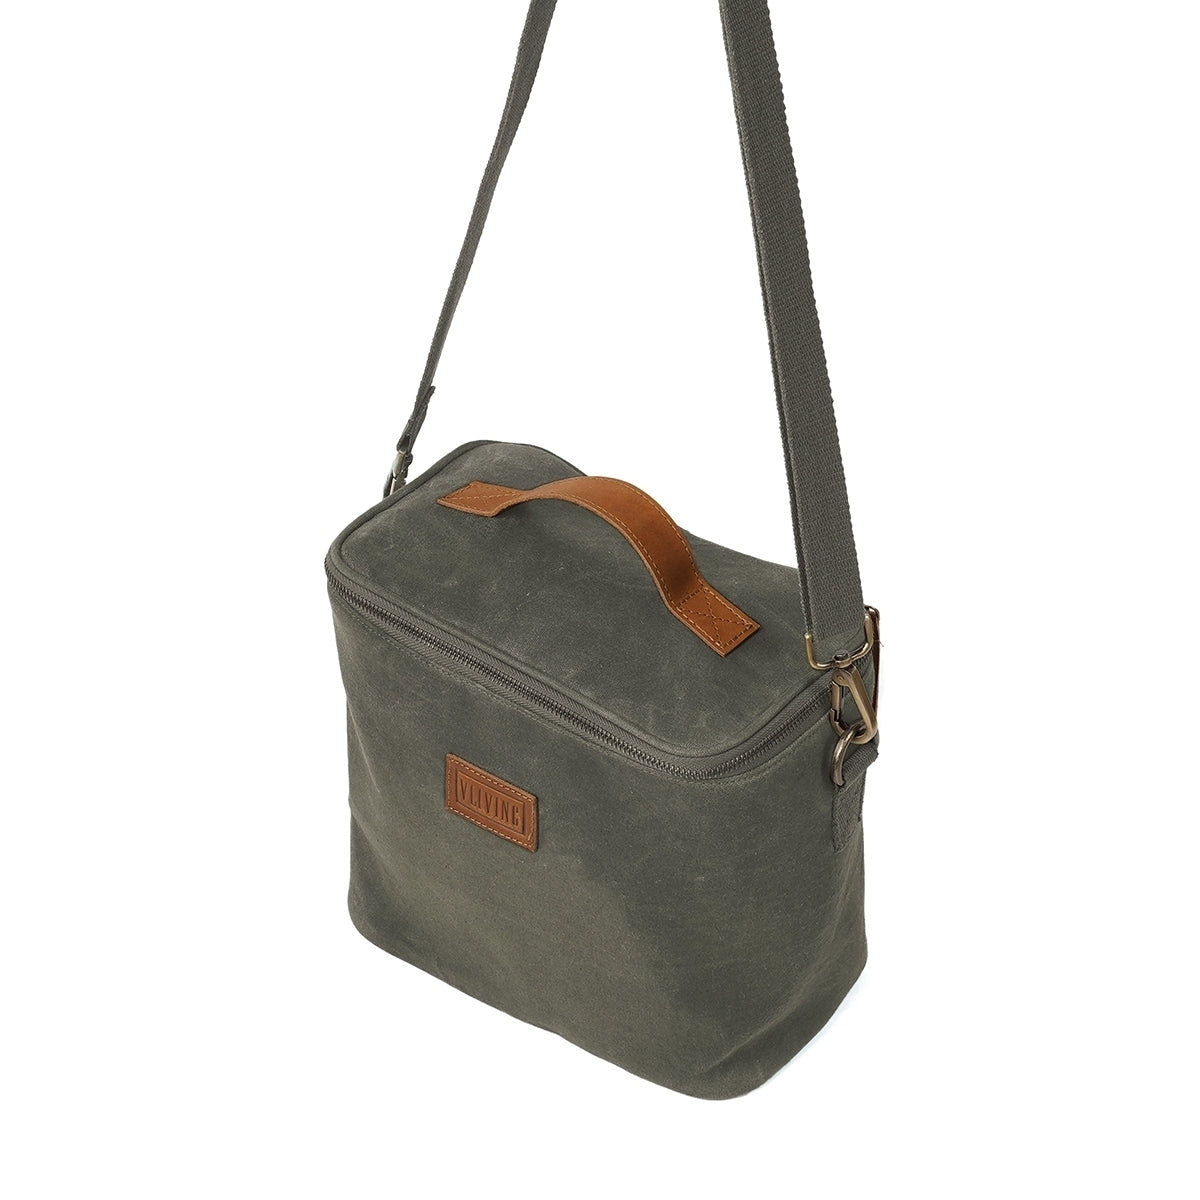 Olive Green waxed canvas lunch bag, snack bag, with insulation lining, 9.5X8.5X5 inches